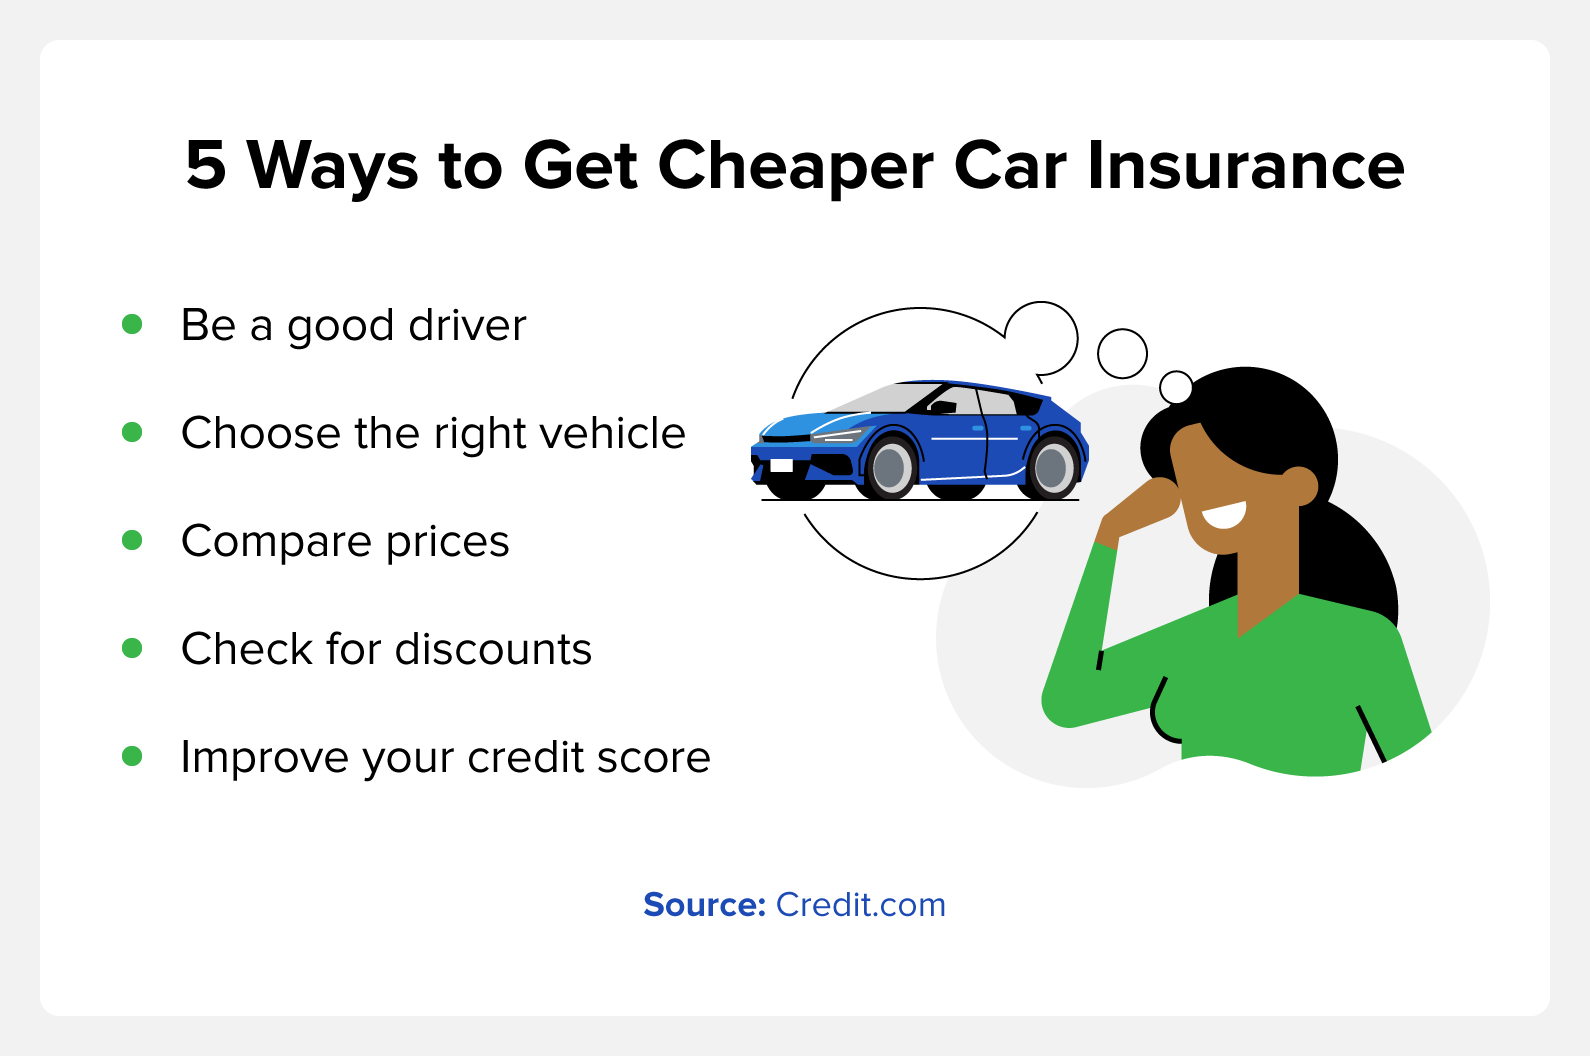 5 ways to get cheaper car insurance